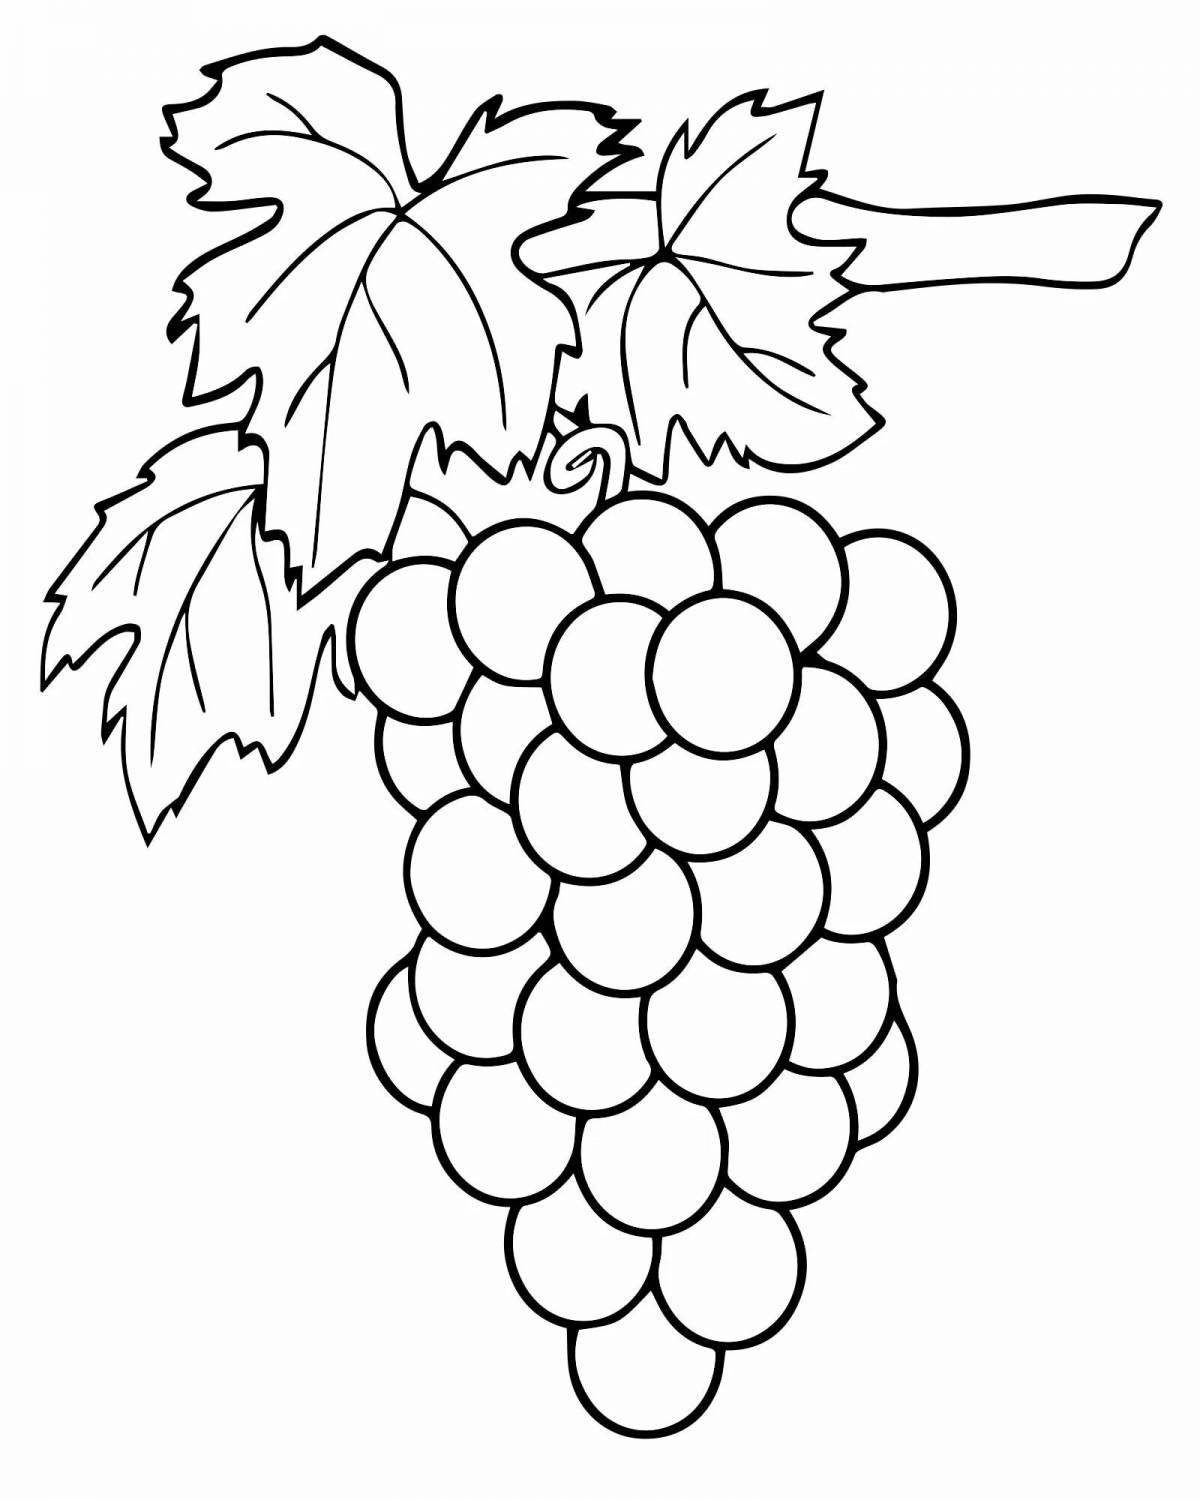 Colorful grape coloring page for 3-4 year olds